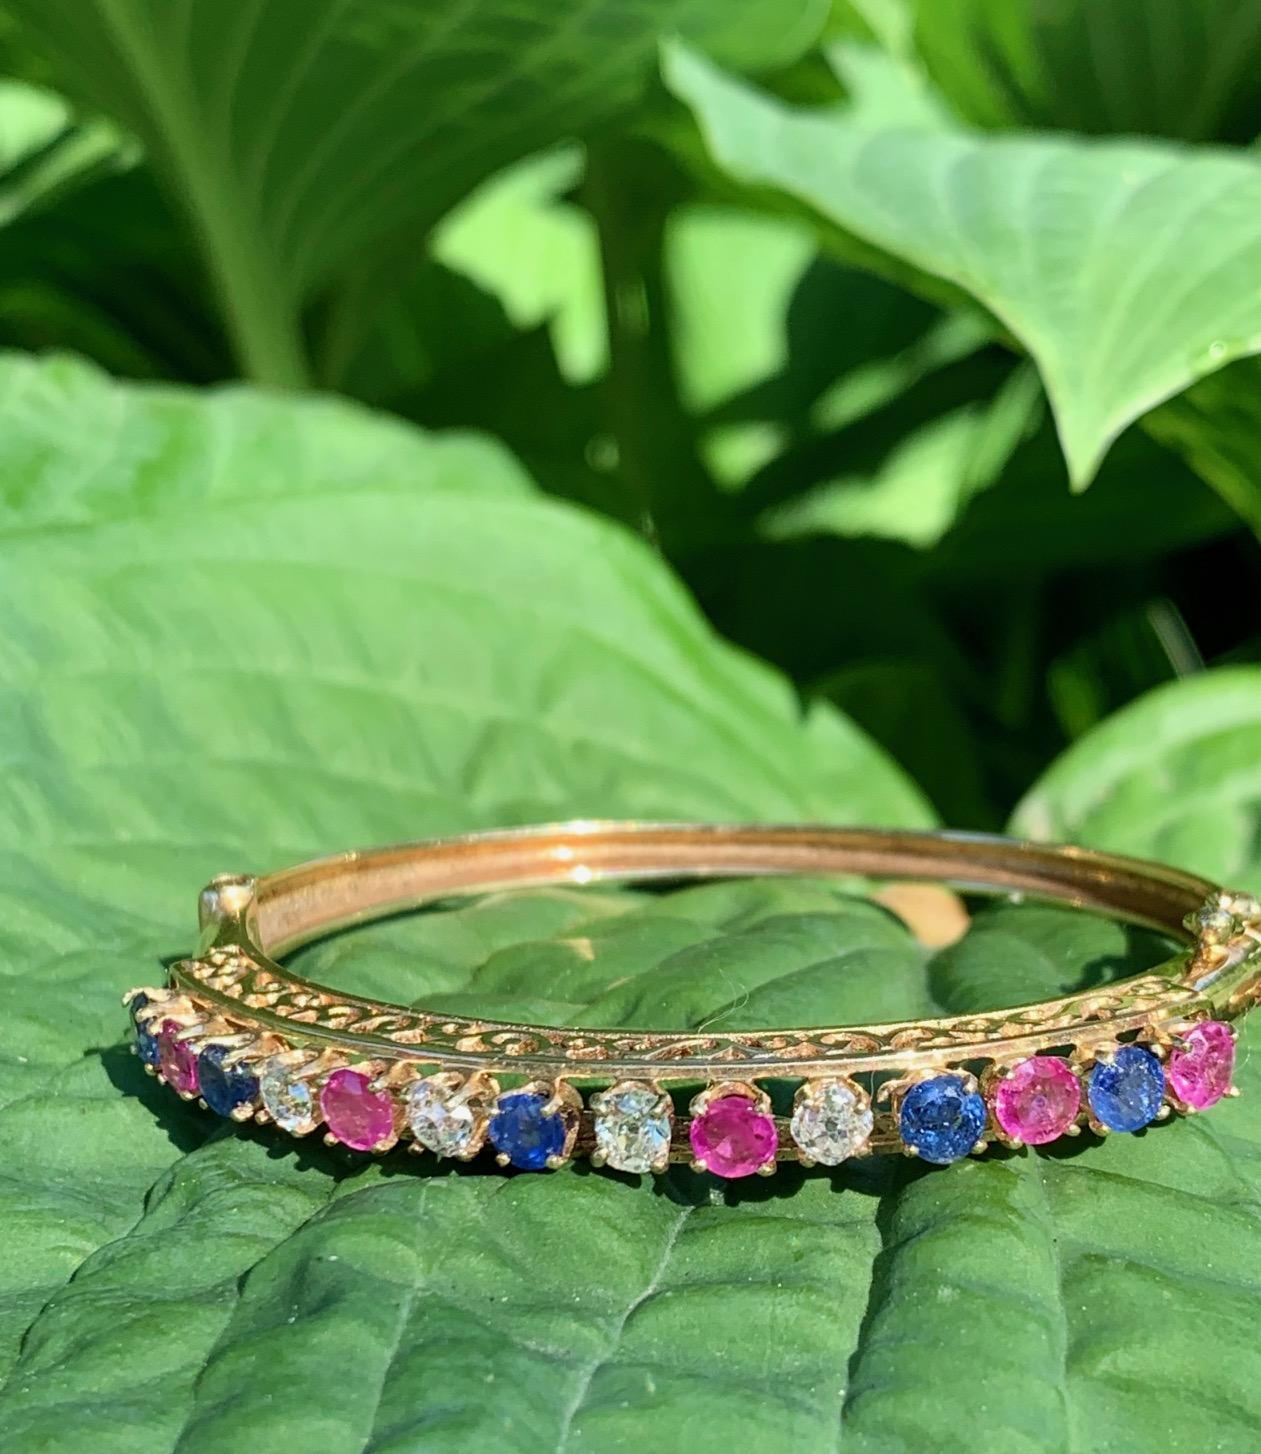 This beautiful modern (1970's) 14k yellow gold bangle features round cut diamonds, rubies and sapphires.  A latch opening closes with a box clasp and a safety hook.
It is stamped 14k.

There are four round cut diamonds; five pink/red rubies; and